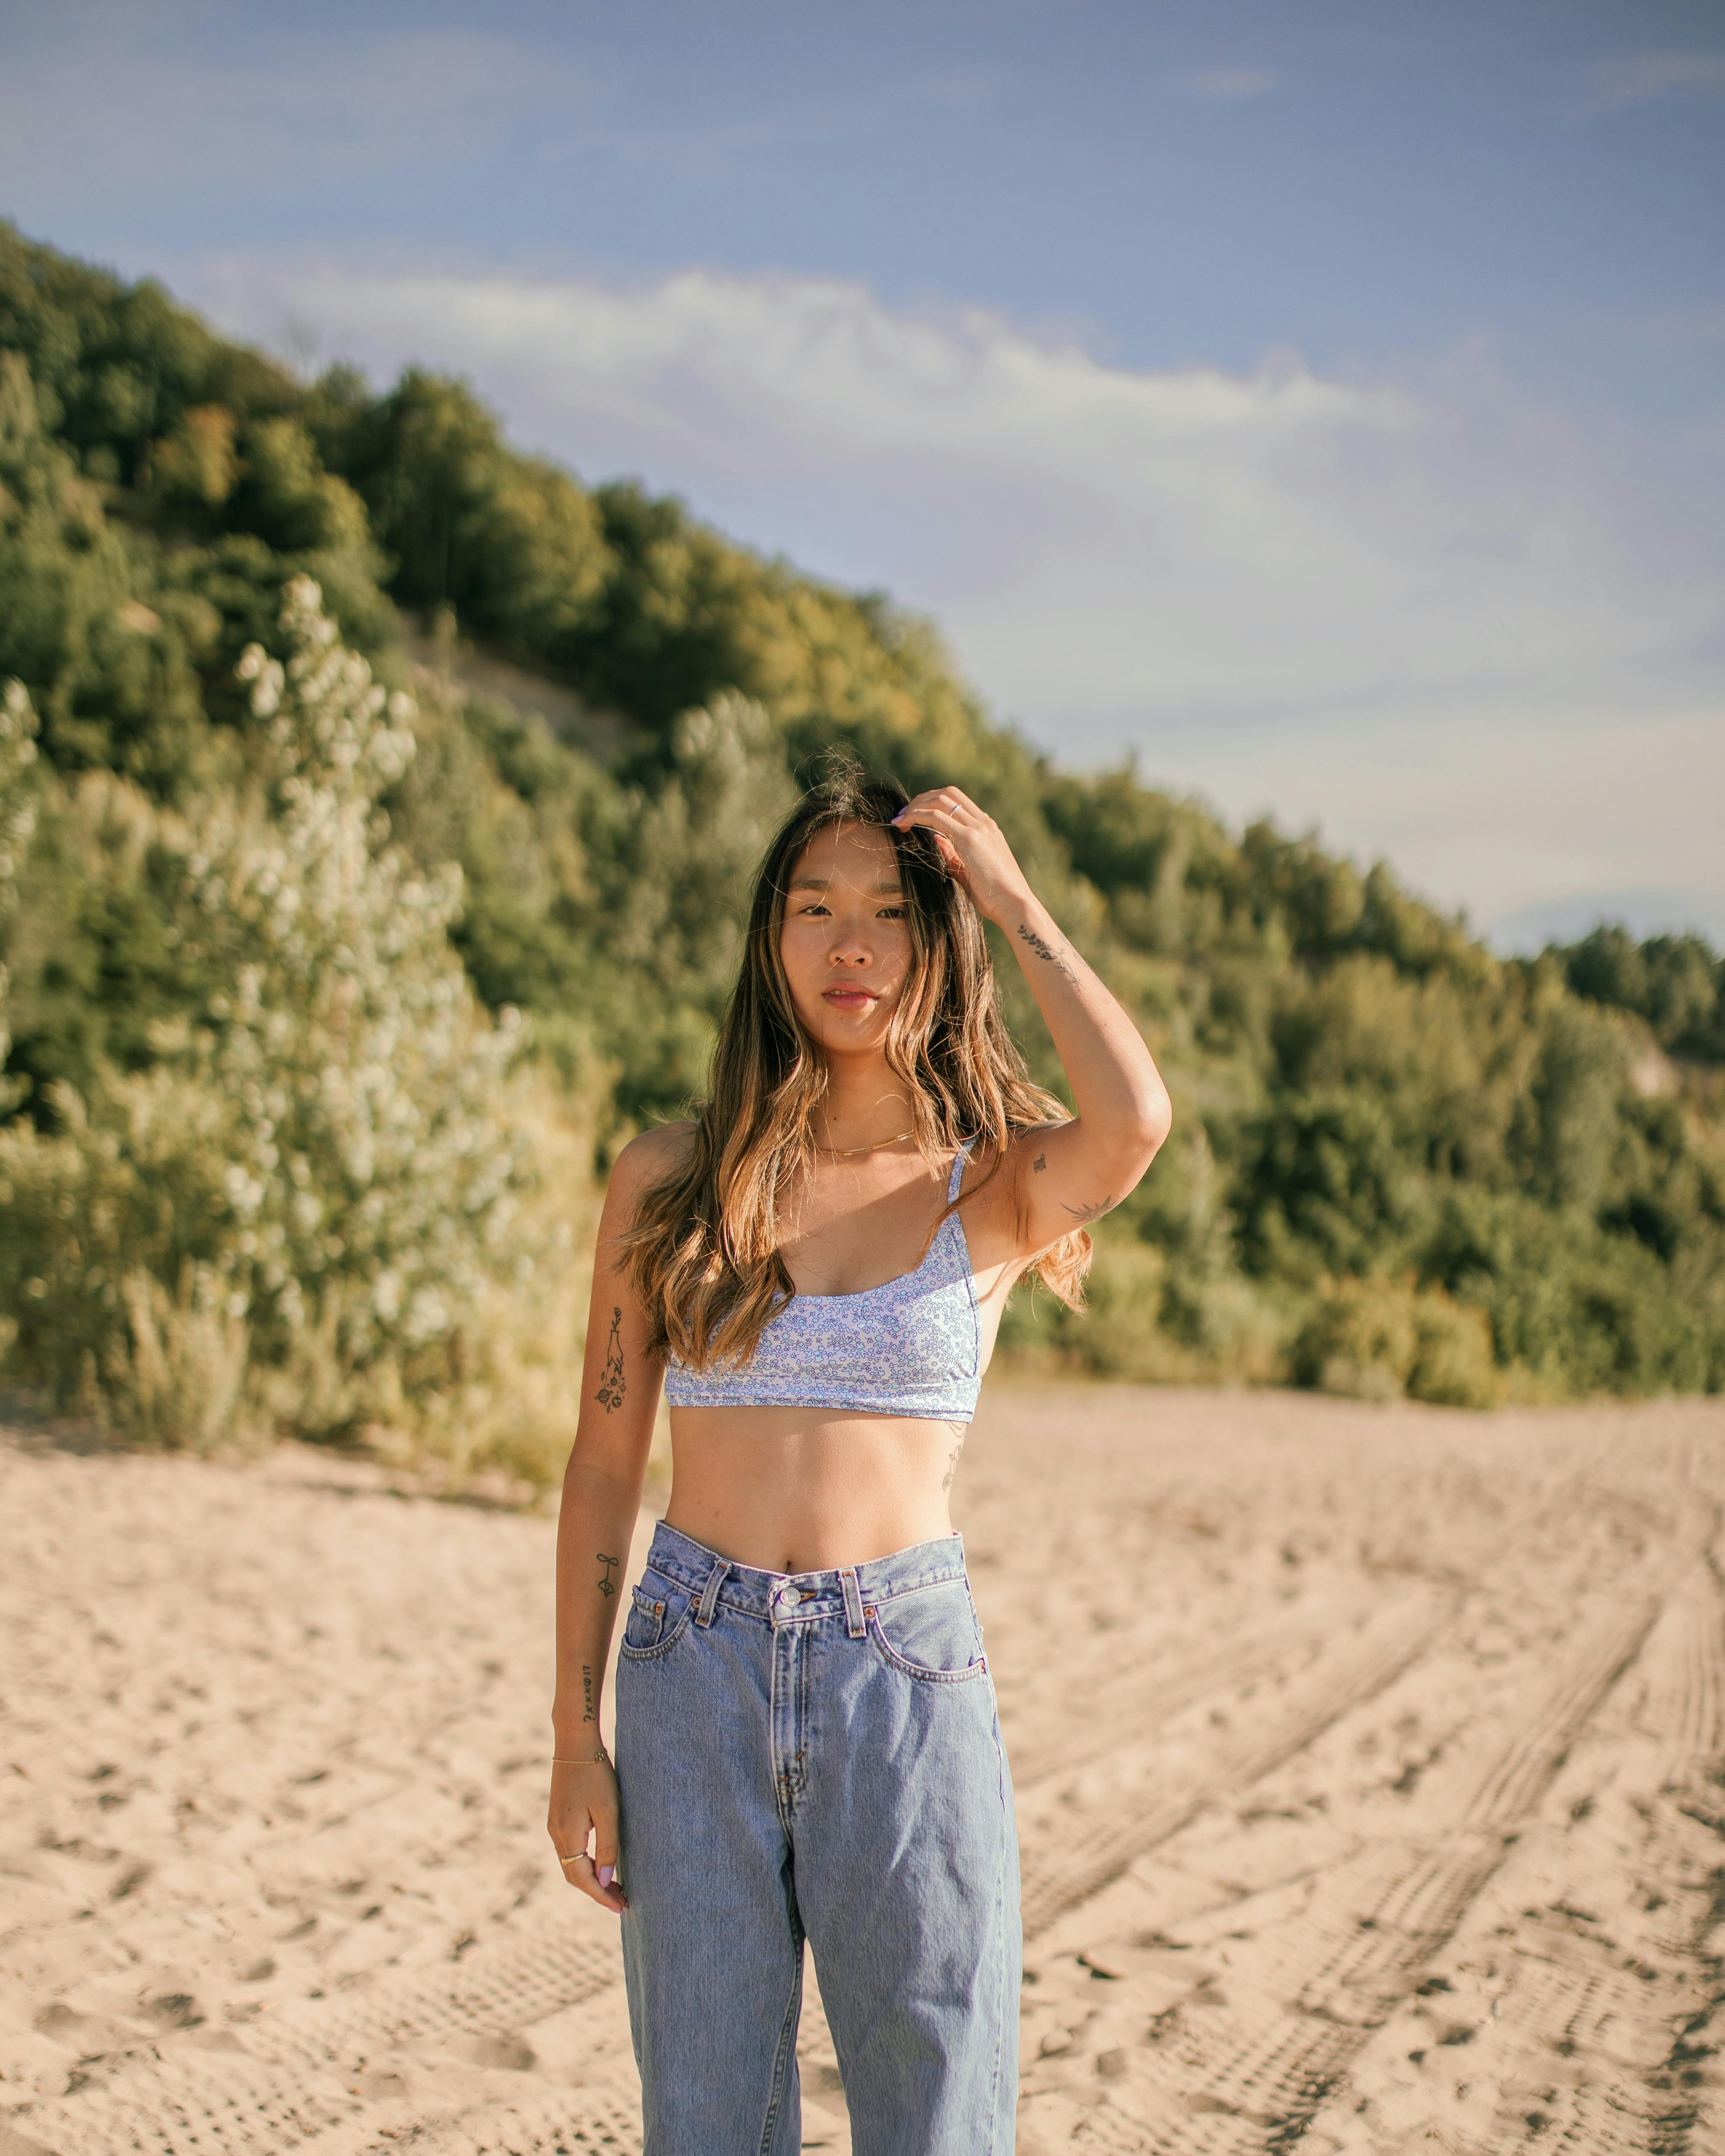 A Woman Wearing Crop Top and Denim Jeans · Free Stock Photo